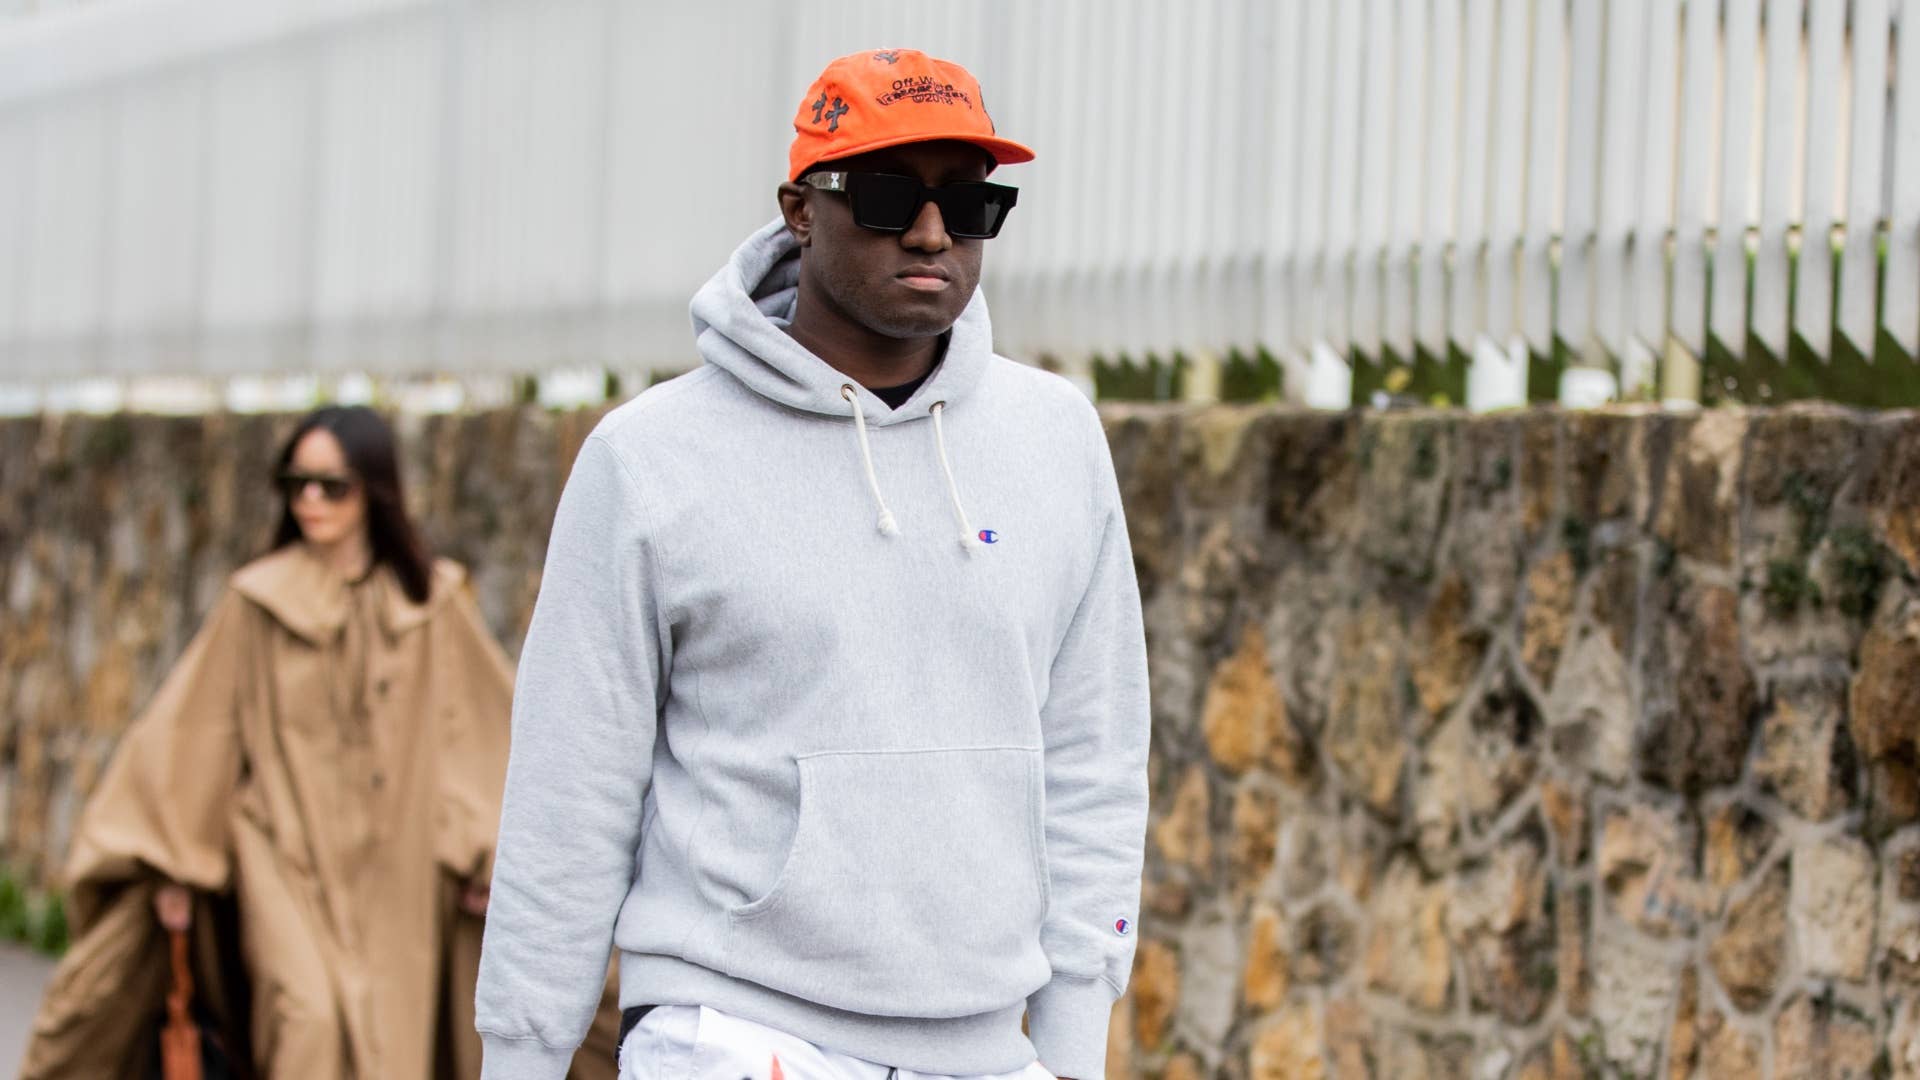 Virgil Abloh, Heron Preston, and More Contribute Designs to 'Our Lives in  T-Shirts' Charity Project in Miami